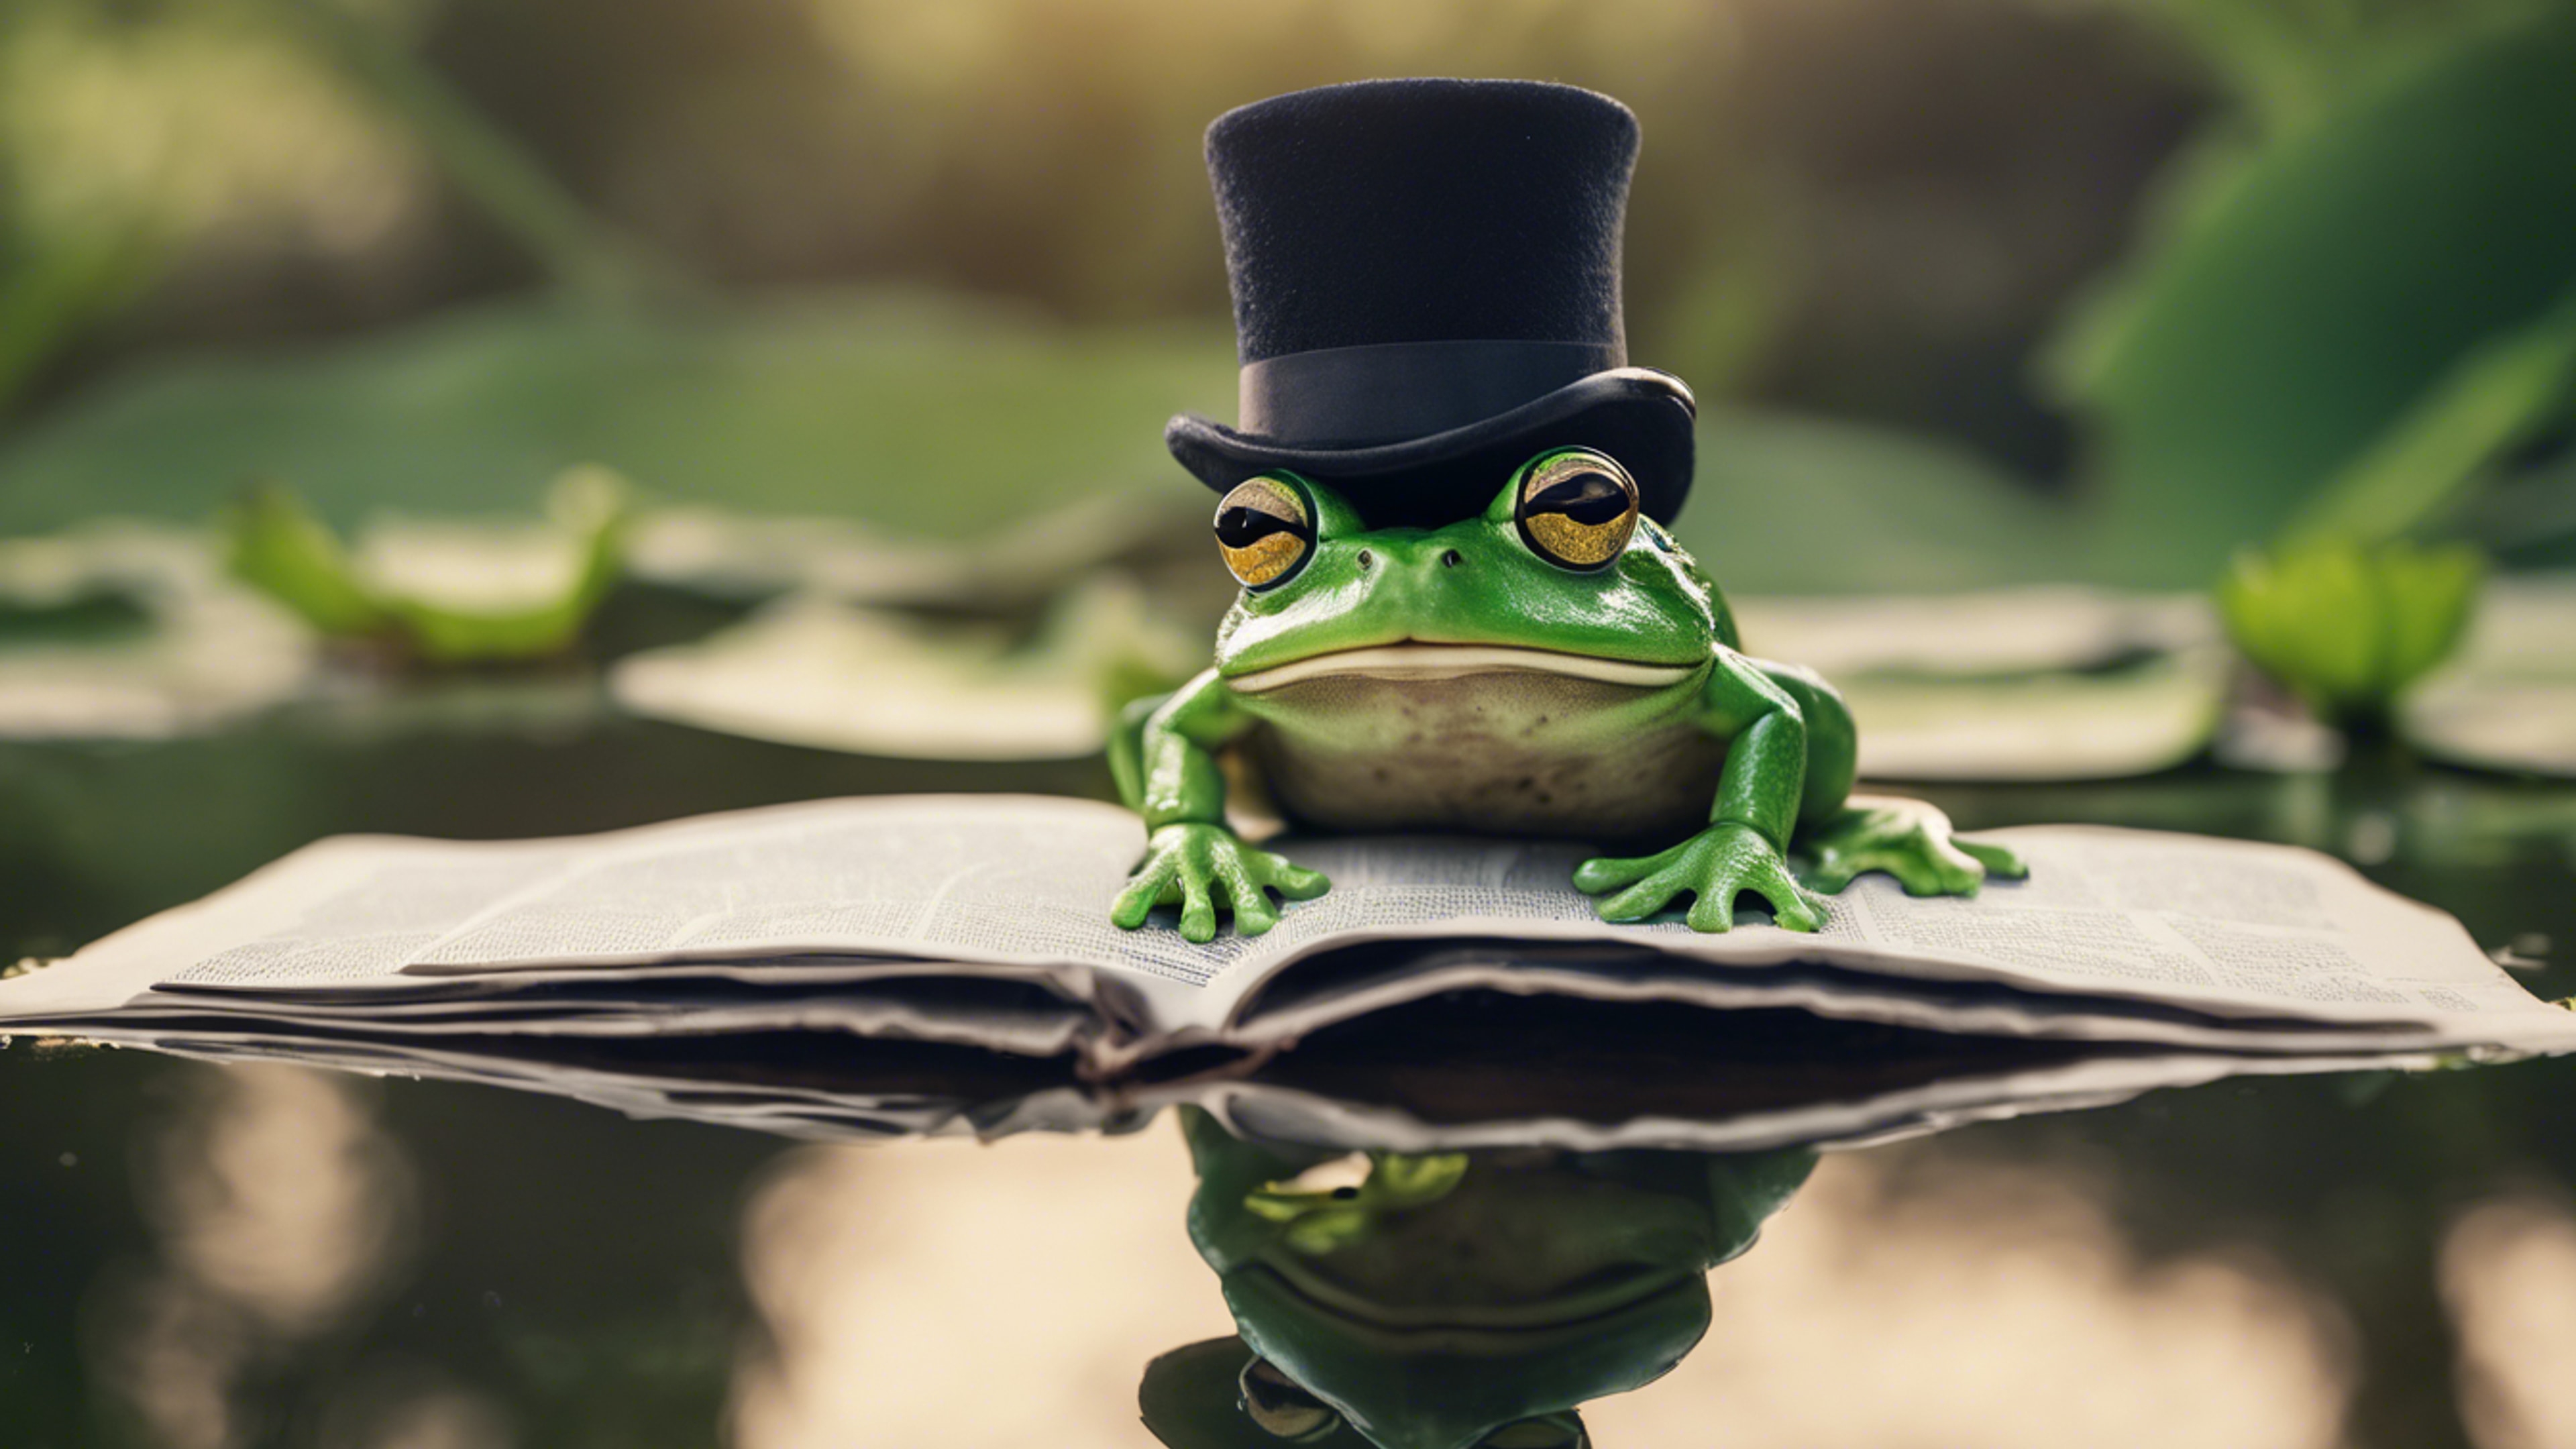 A frog in a top hat and monocle reading a newspaper on a lily pad. Wallpaper[b0ddd333718f414da74f]